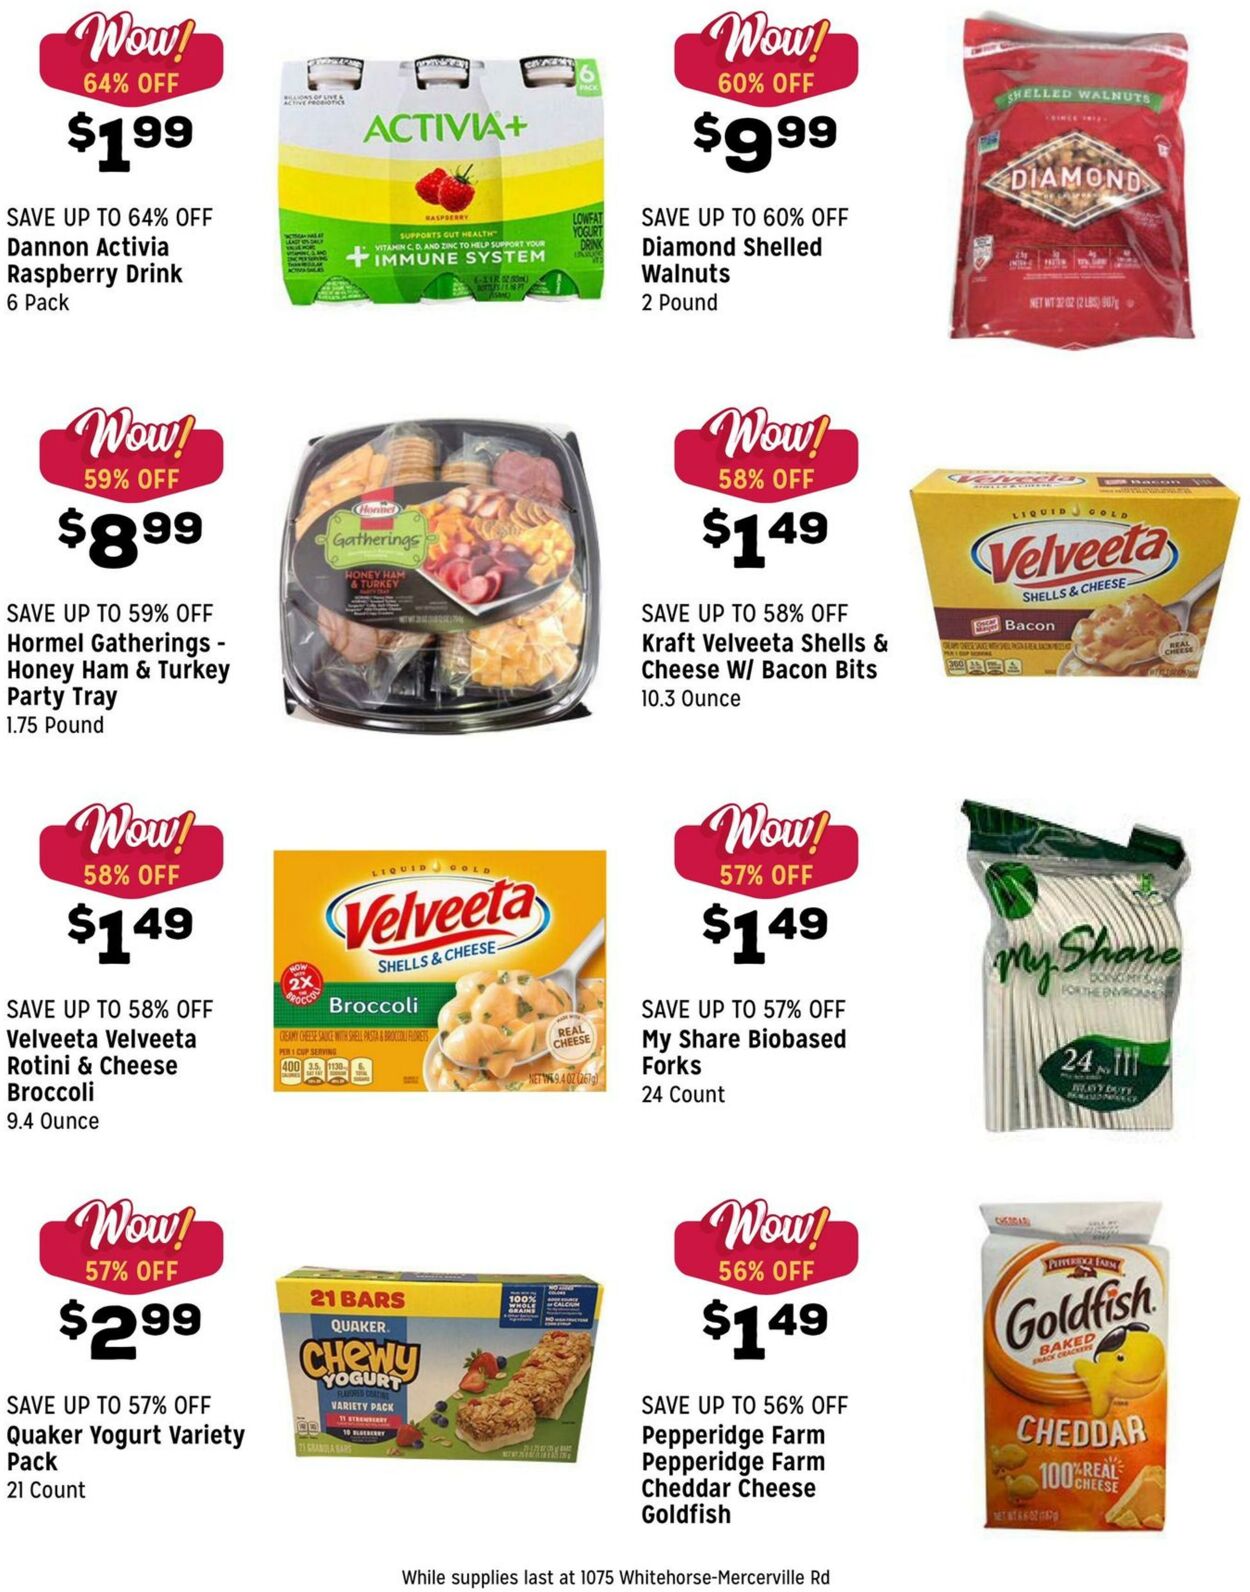 Weekly ad Grocery Outlet 09/28/2022 - 10/04/2022